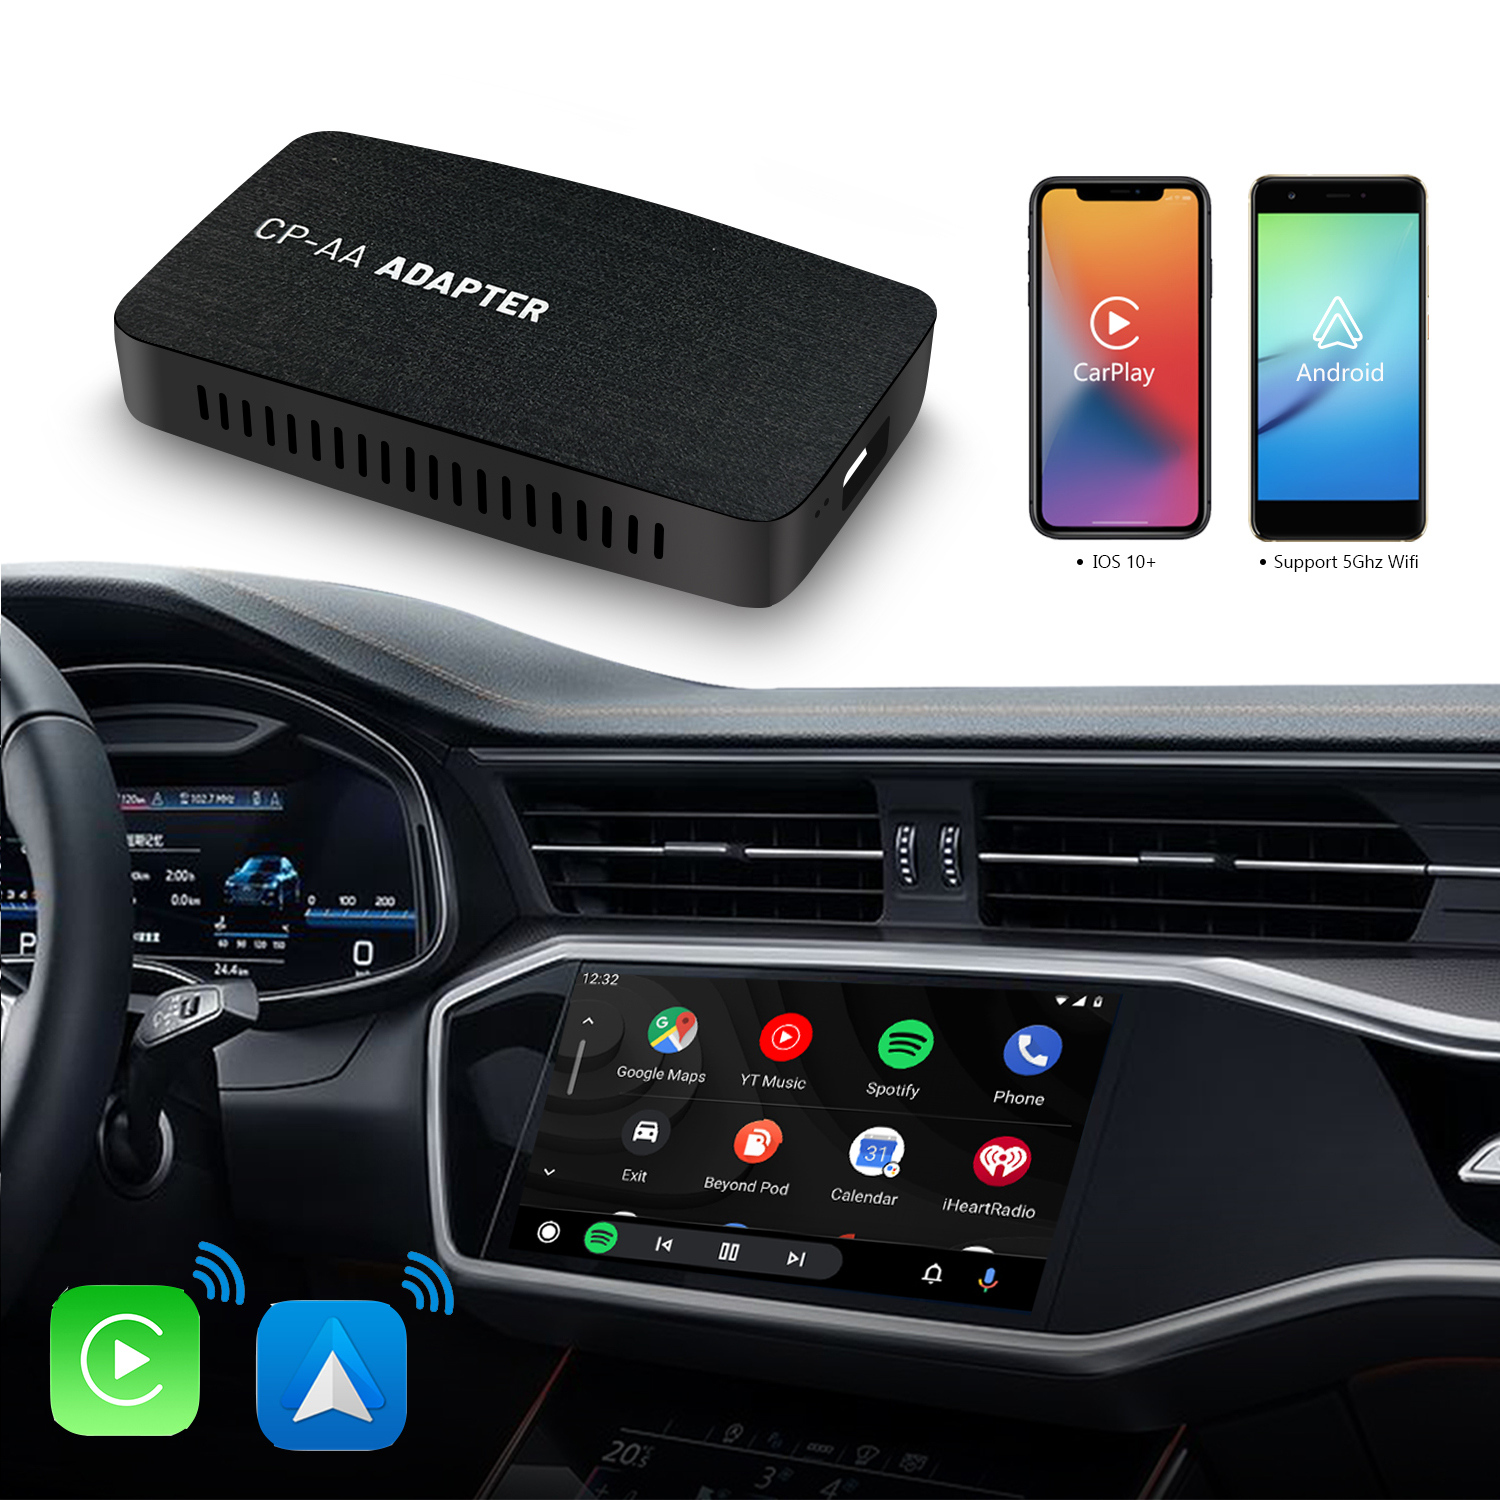 Android Auto Wireless Adapter For Wired Android Auto Car Plug & Play Easy  Setup Aa Wireless Android